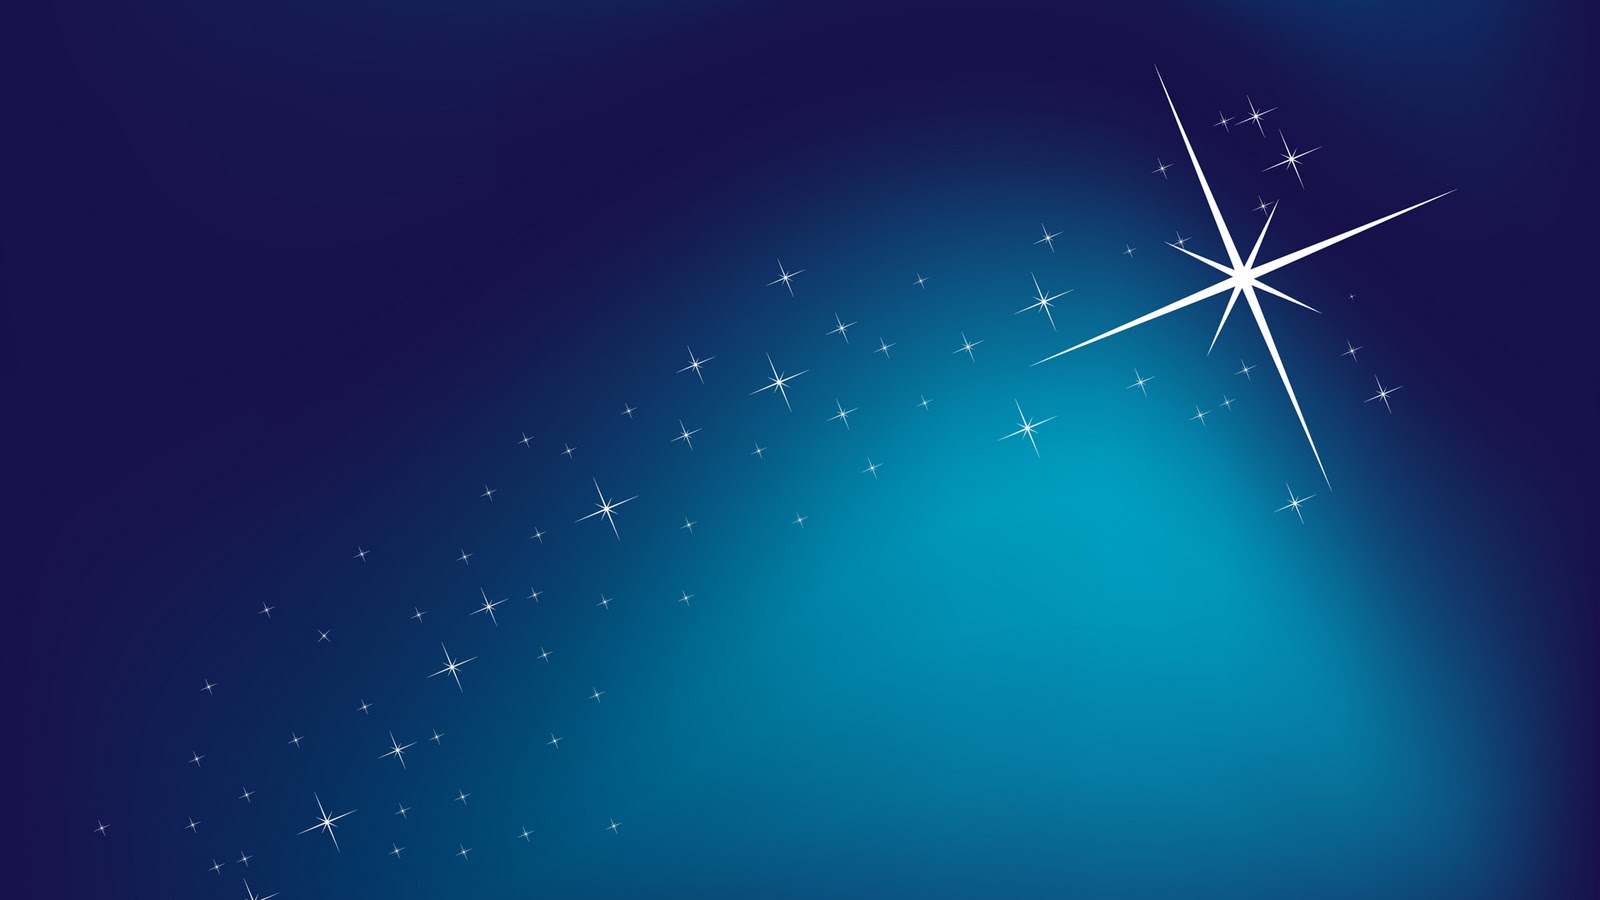 Christmas Star Background Image Amp Pictures Becuo